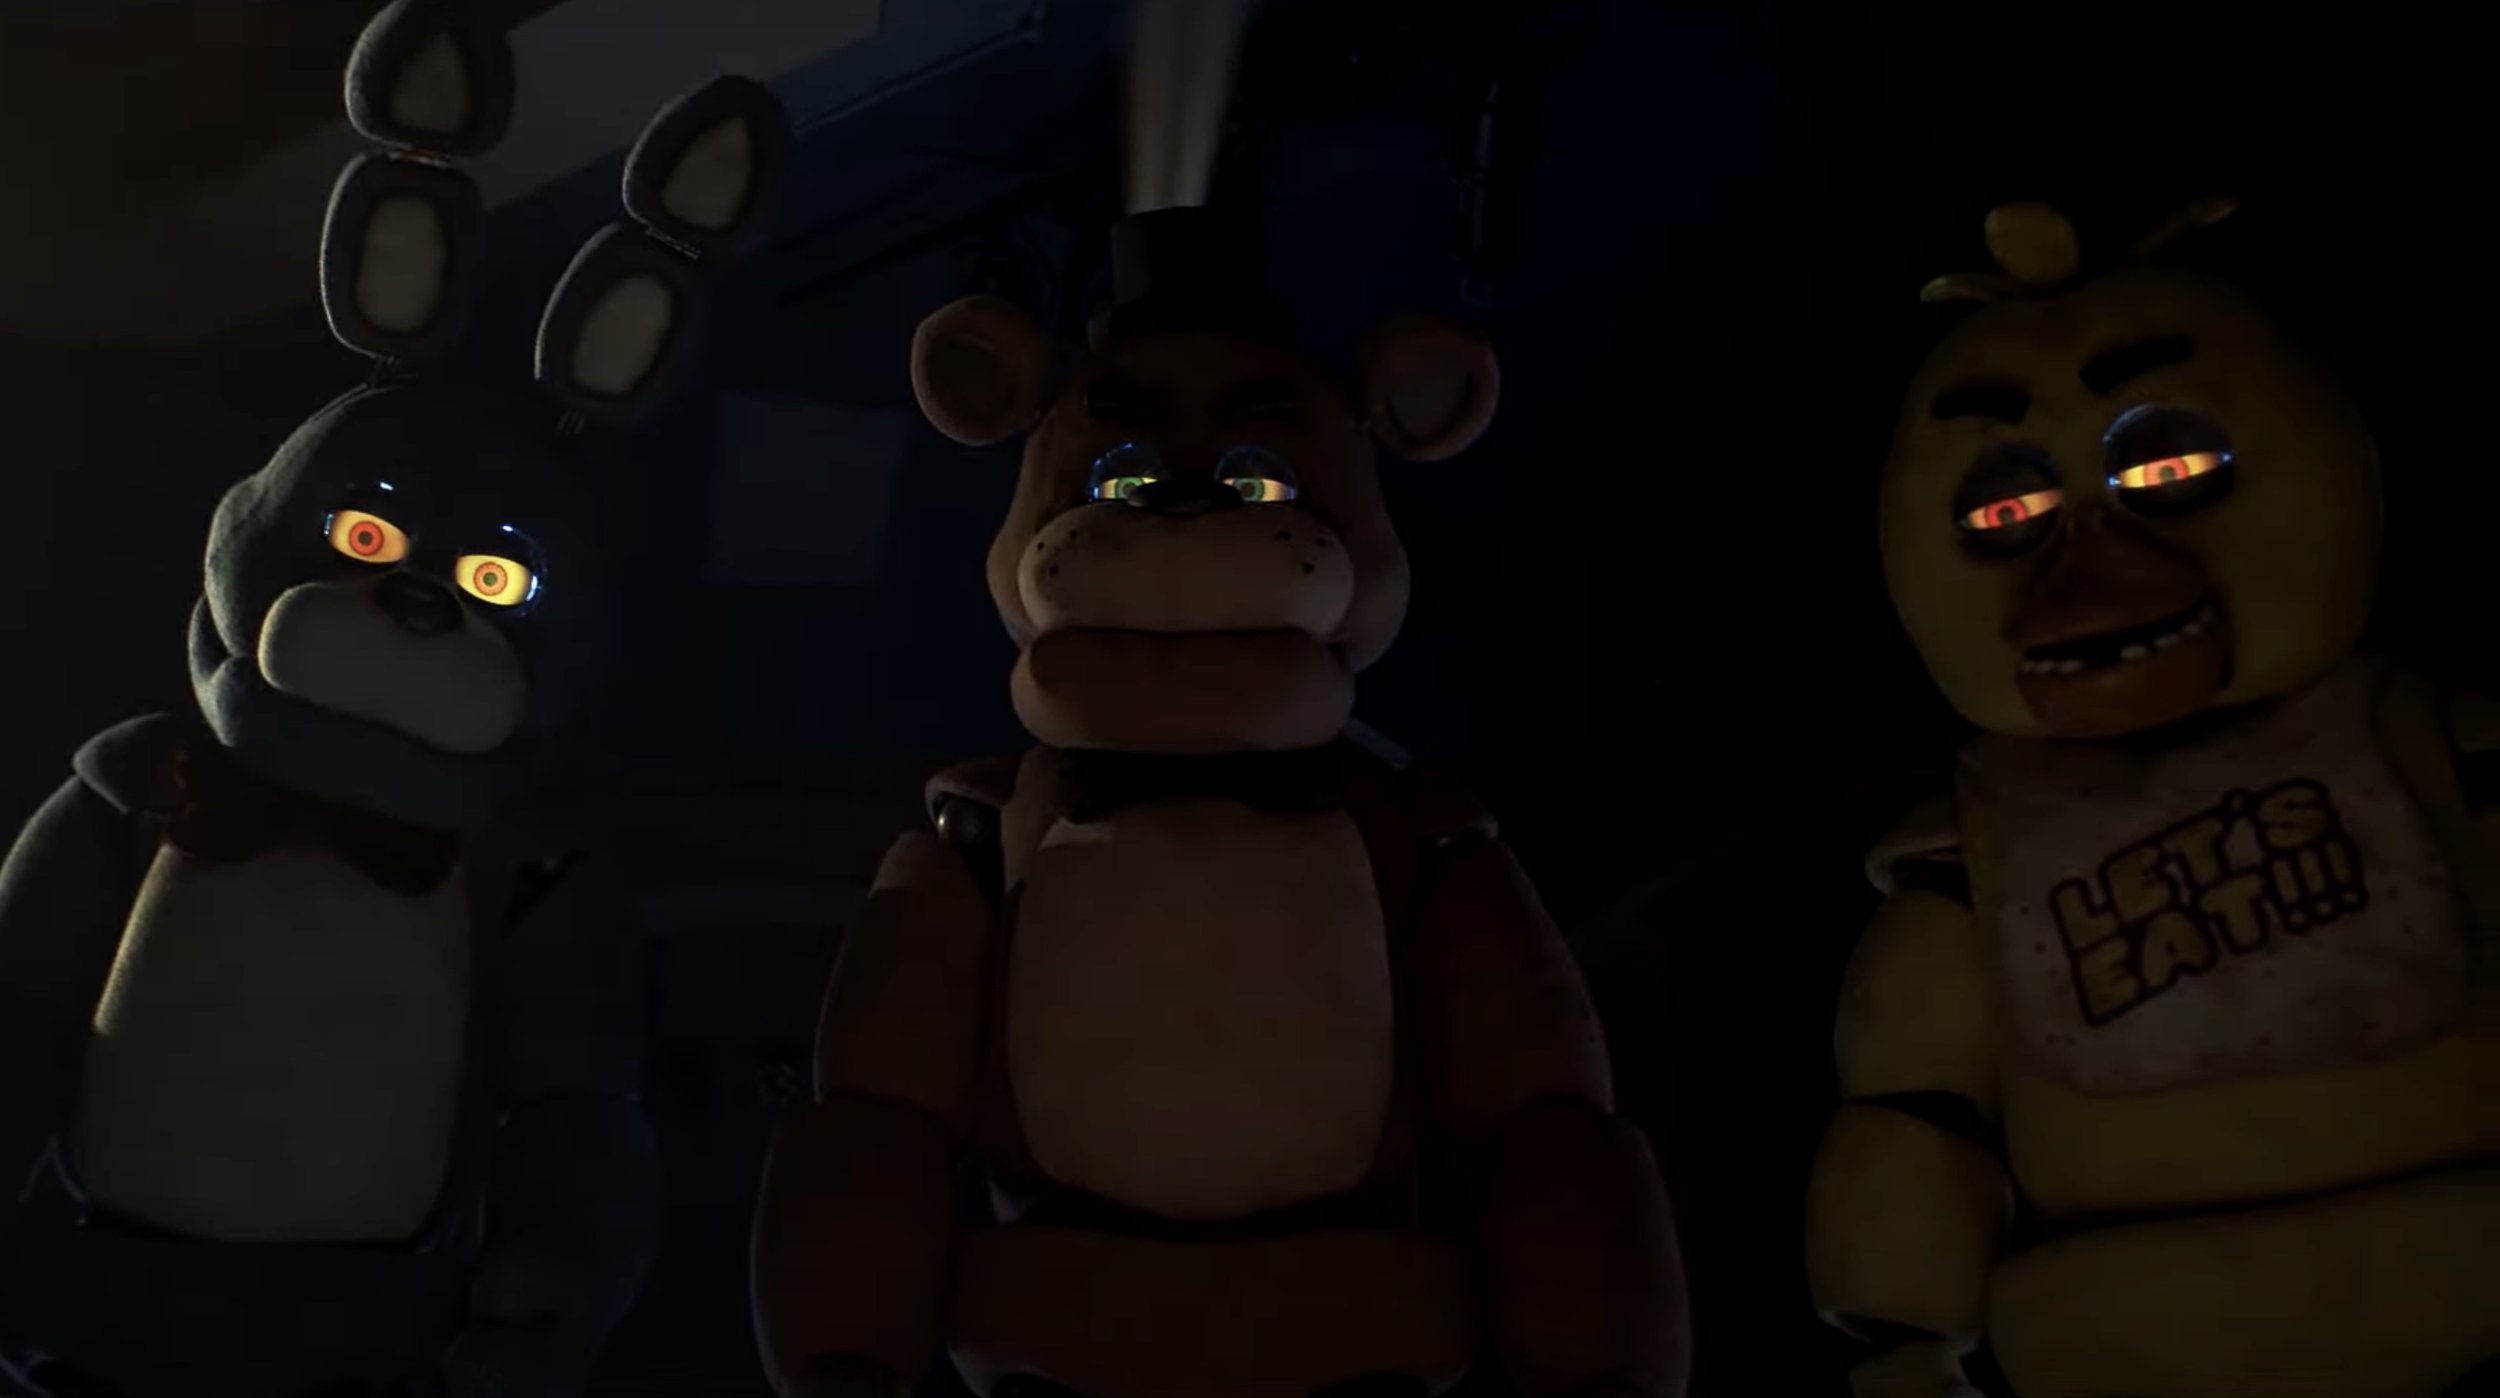 Five Nights at Freddy's - A Look Inside 